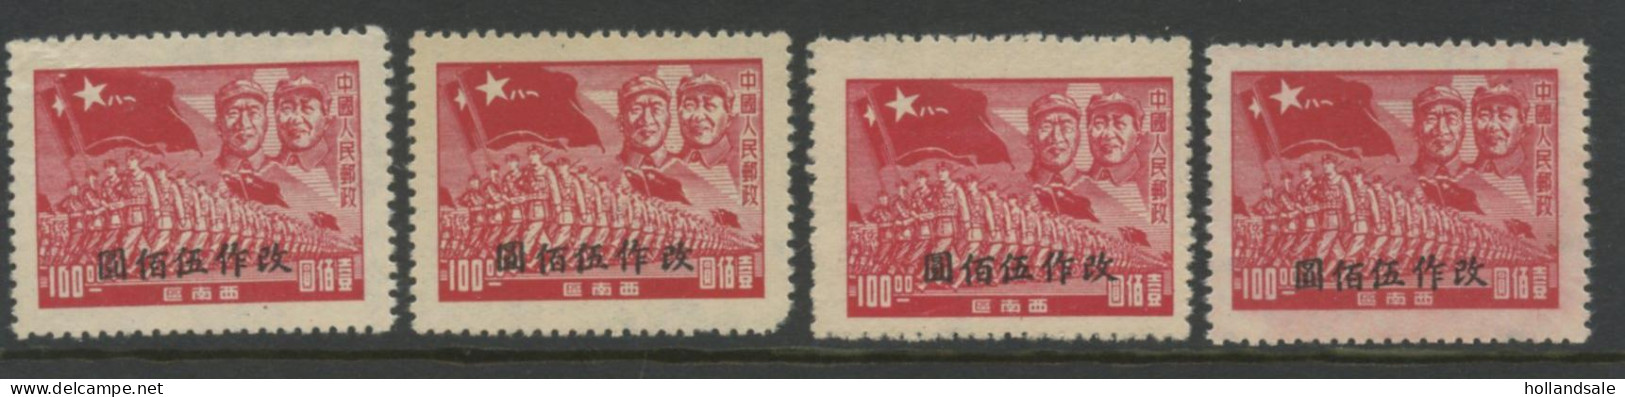 CHINA SOUTH WEST - 1950 $500 On $100 MICHEL # 36. Four (4) X. Unused. - Chine Del Suoeste 1949-50